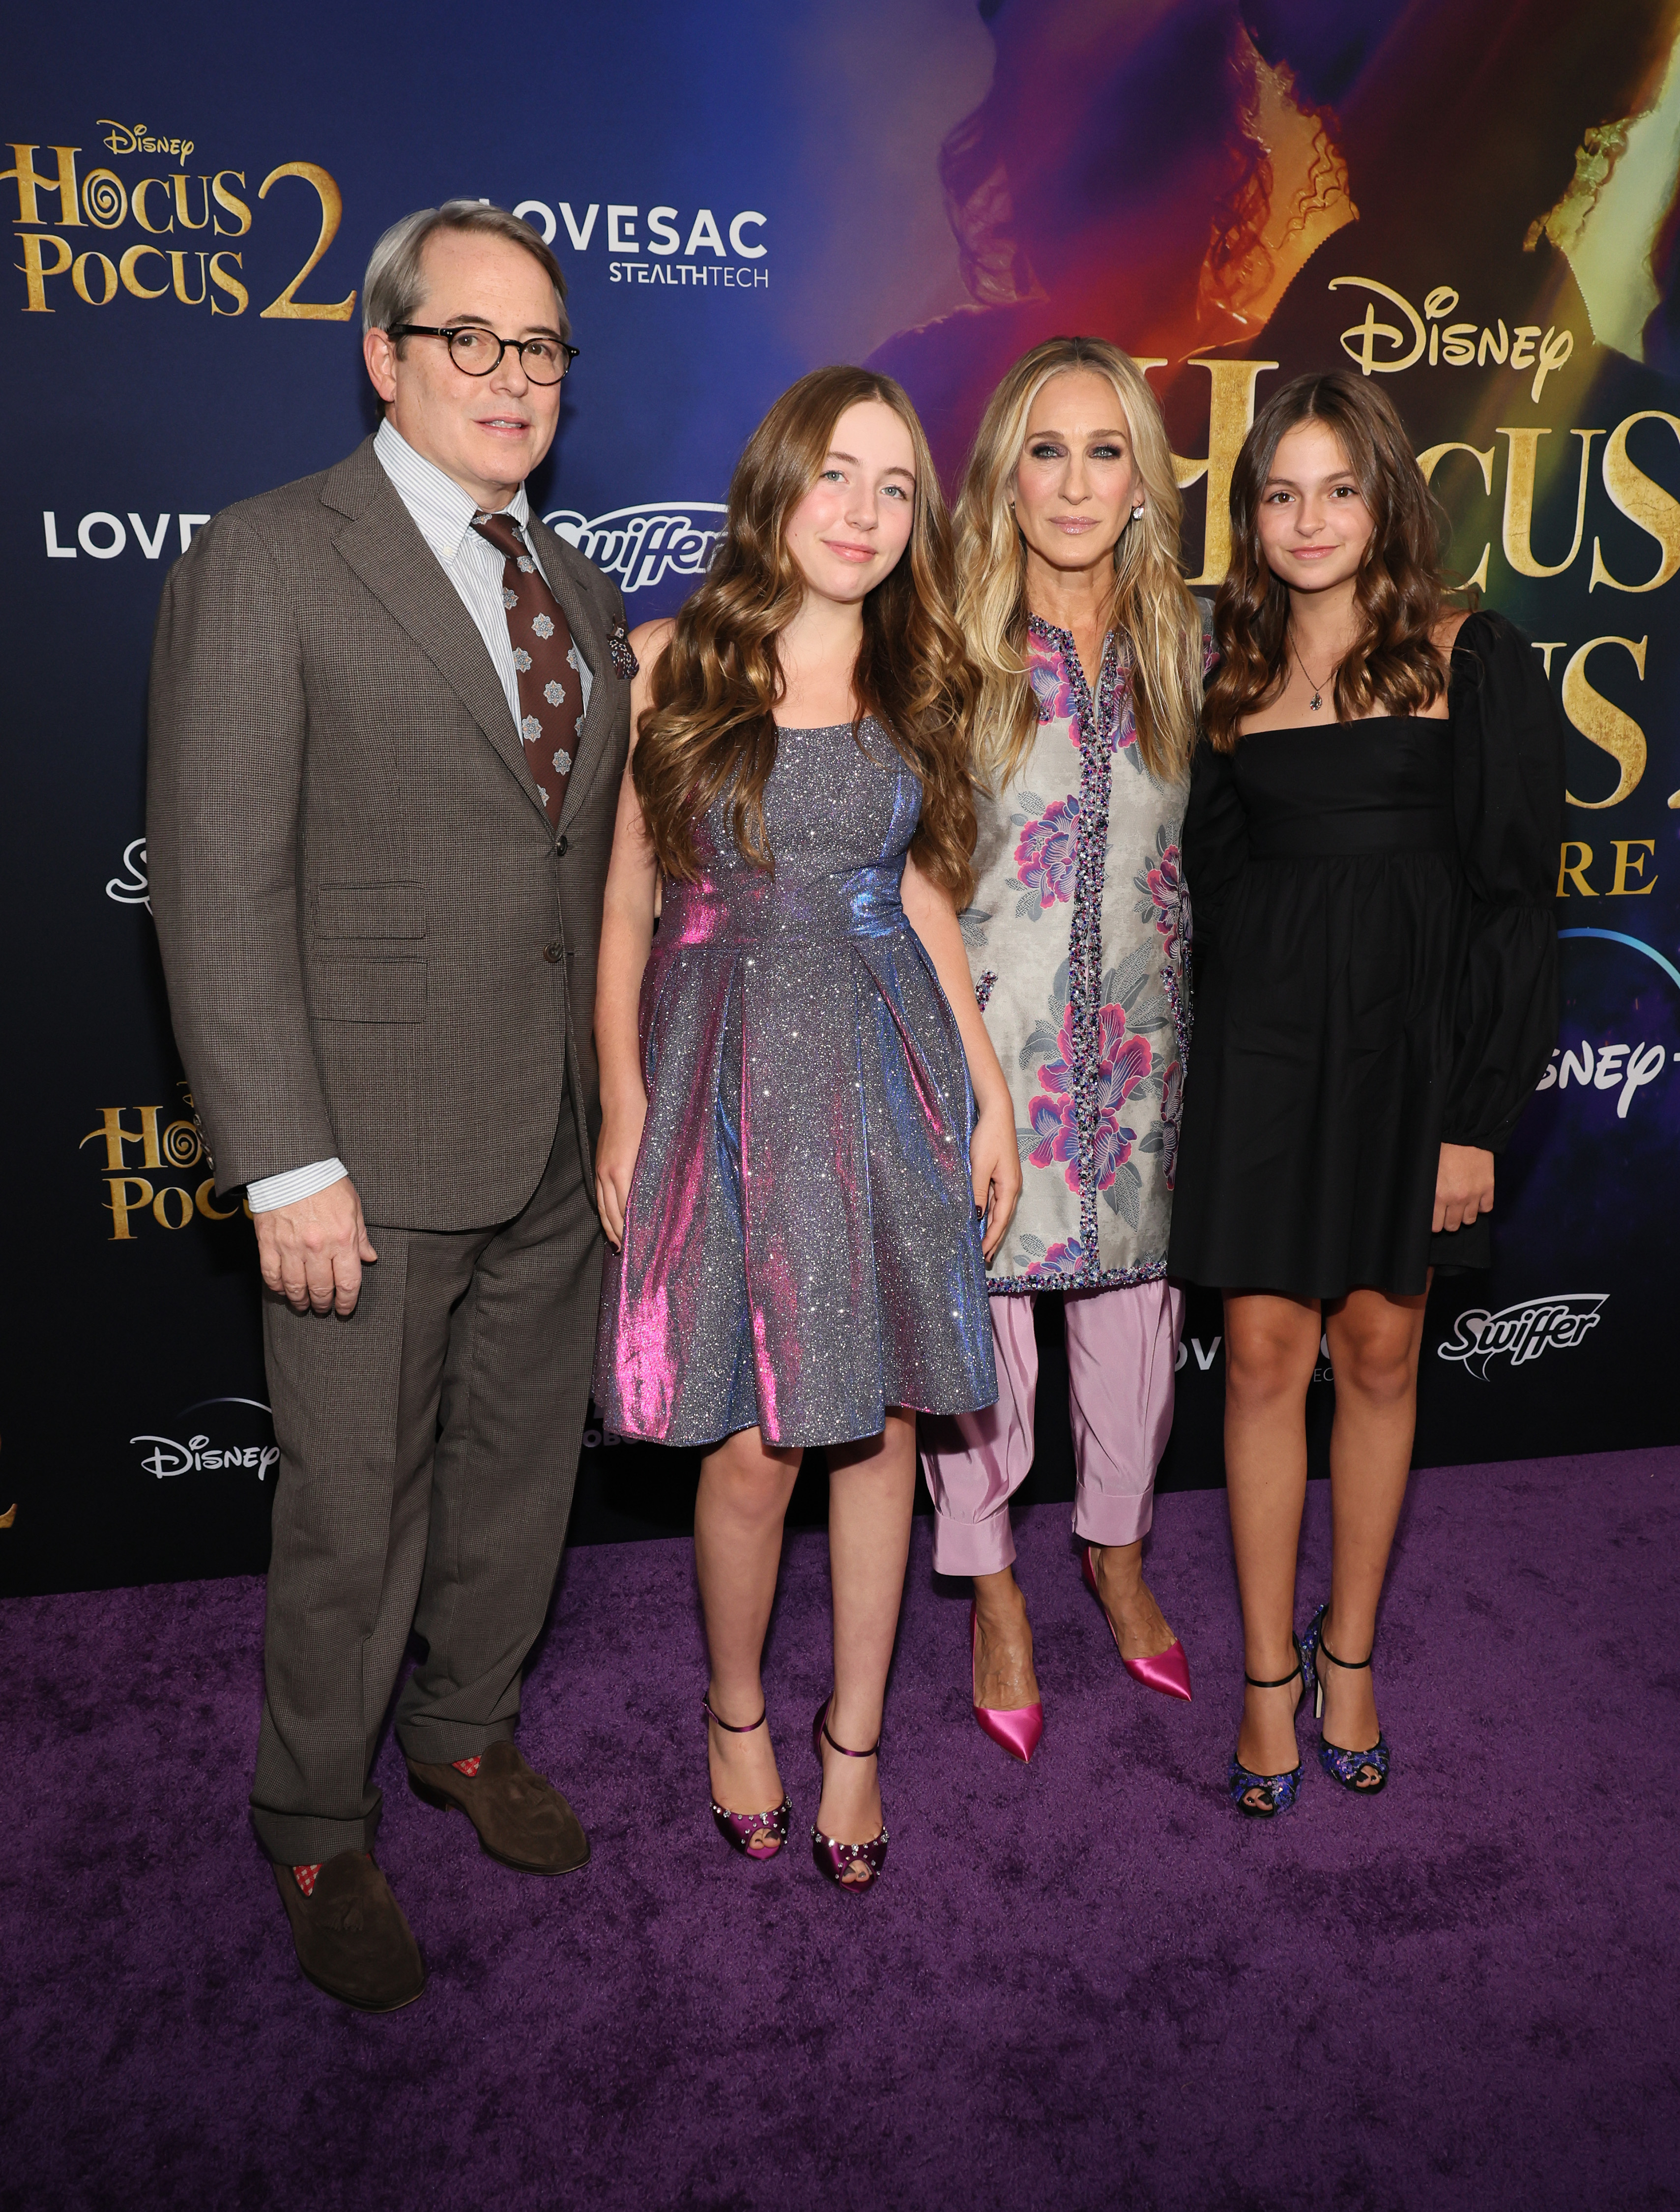 Sarah Jessica Parker and Matthew Broderick and their daughters